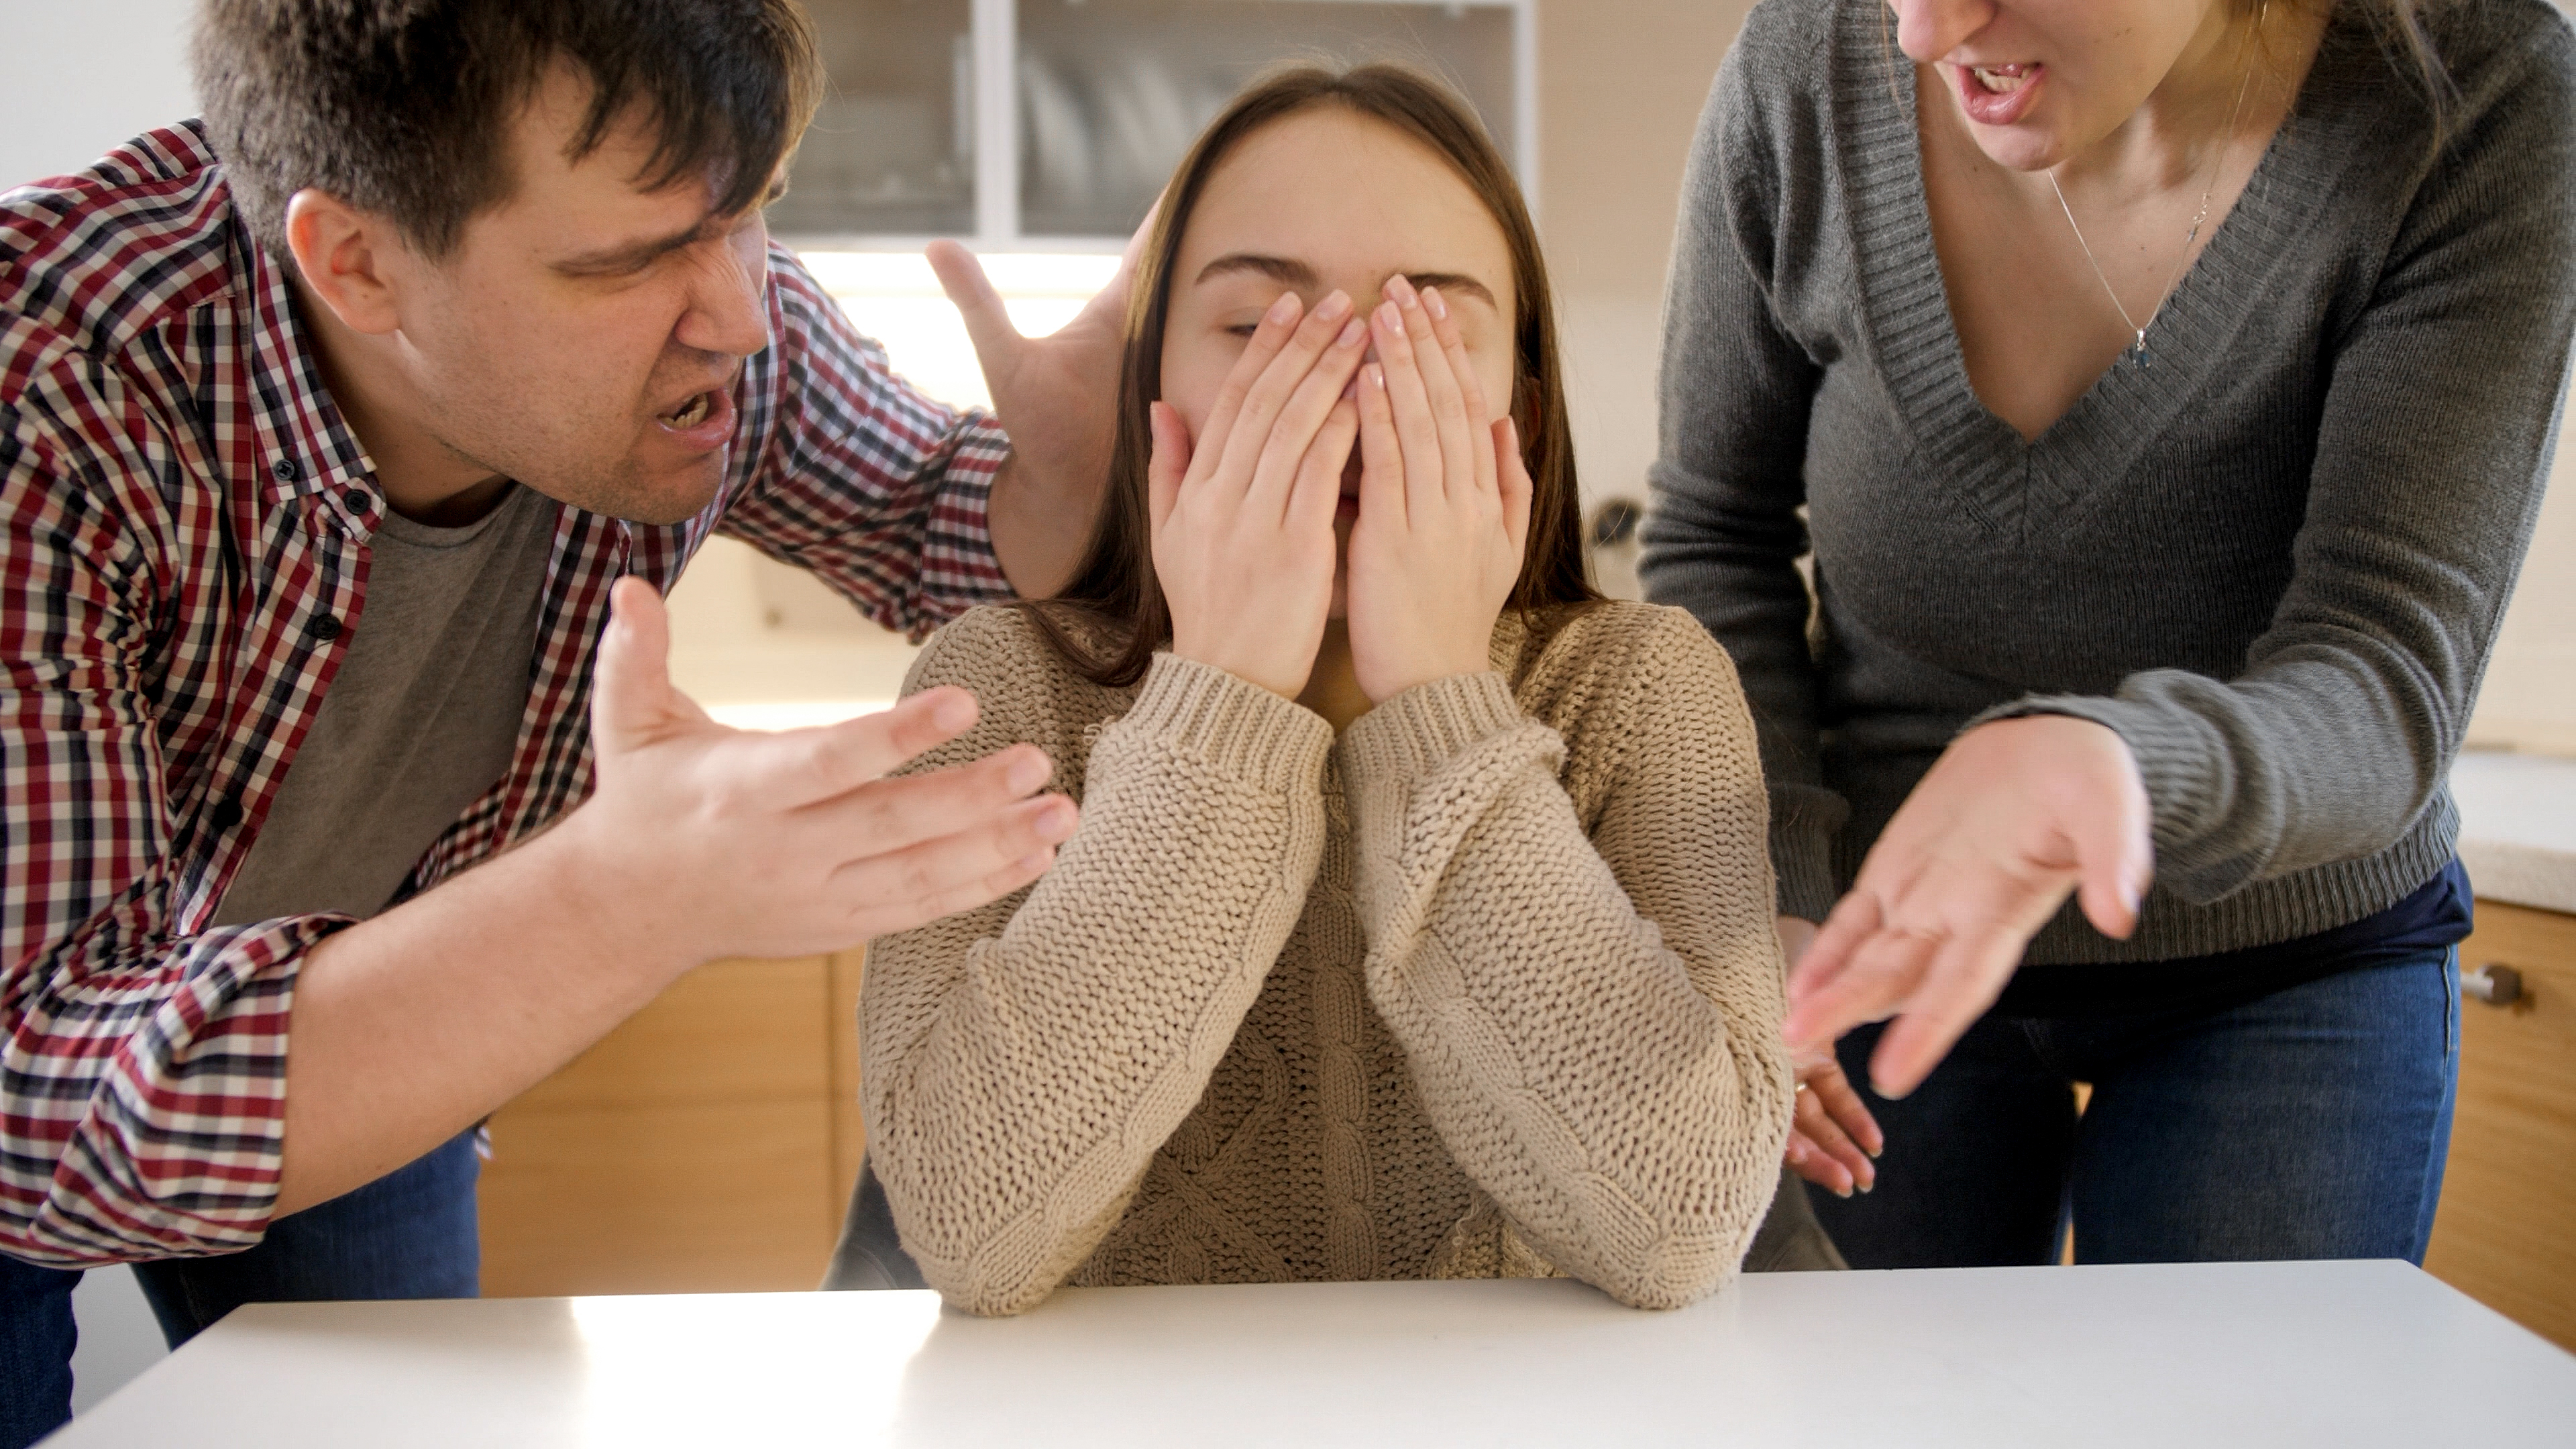 A teenage girl crying after a conflict with her parents | Source: Shutterstock